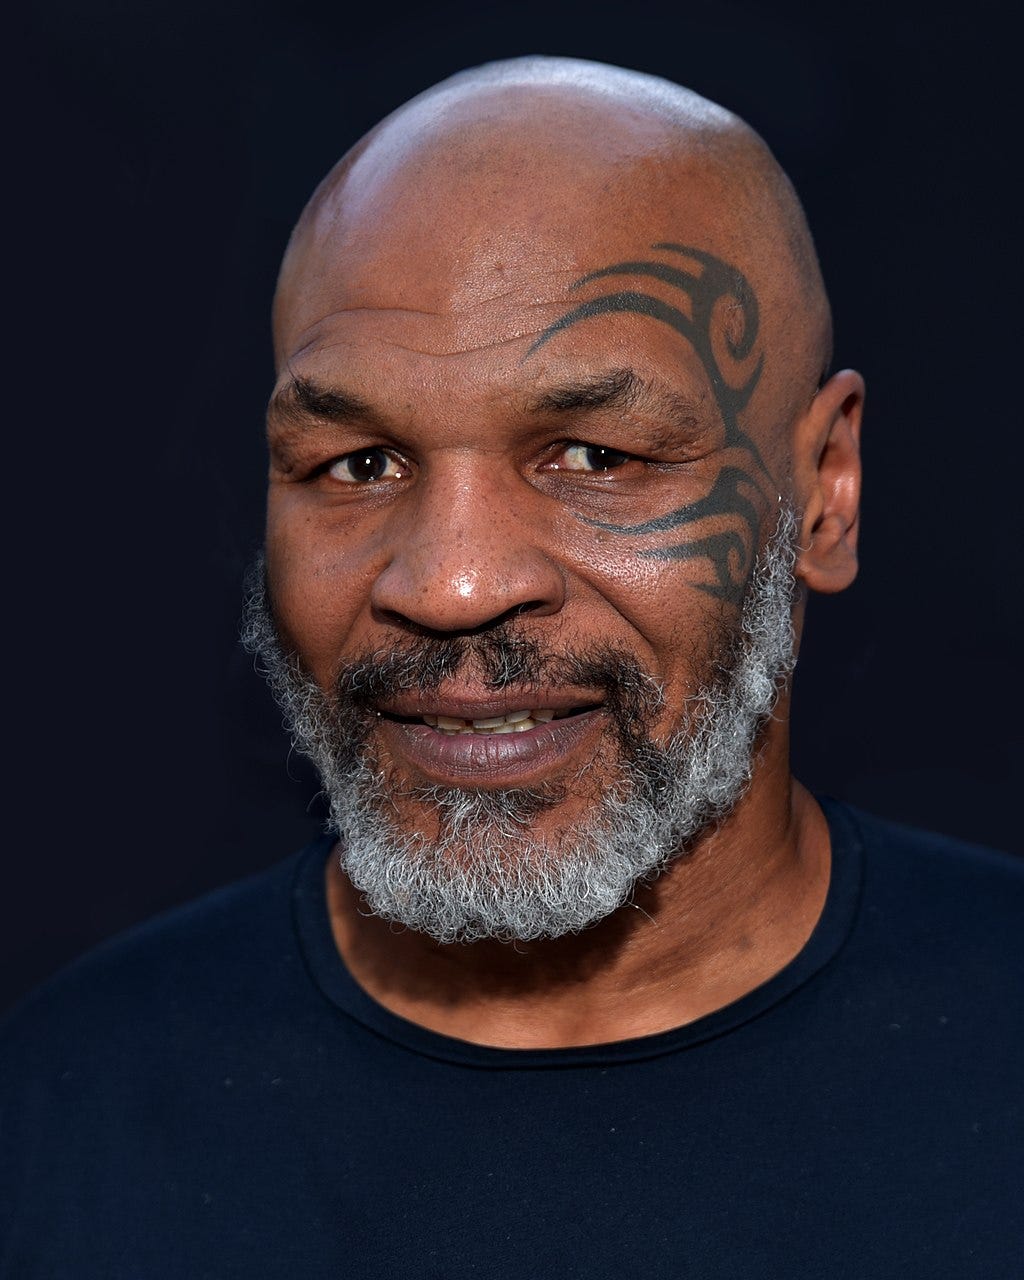 Black Friday: Tyson 2.0 Launches In Colorado With Contest Offering Cannabis Cultivation Tour With Mike Tyson